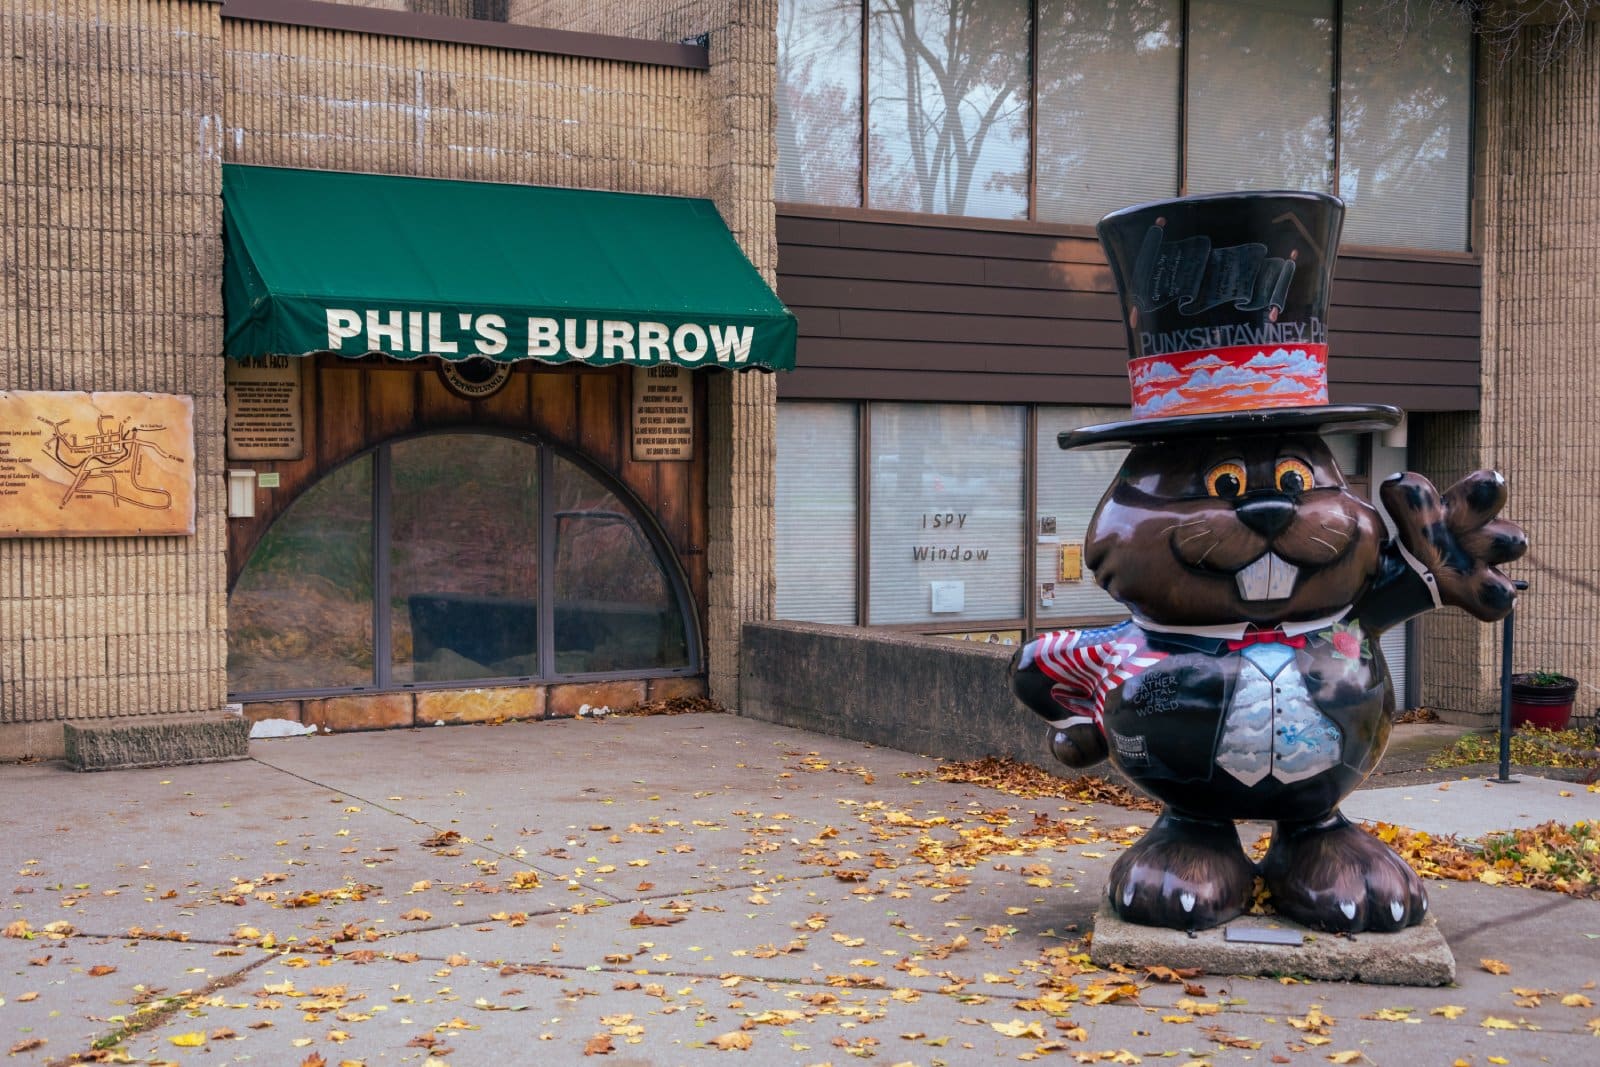 Image Credit: Shutterstock / KLiK Photography <p><span>Punxsutawney Phil ensures that every year, Pennsylvania’s commitment to tradition is front and center, even if it’s just for fun.</span></p>